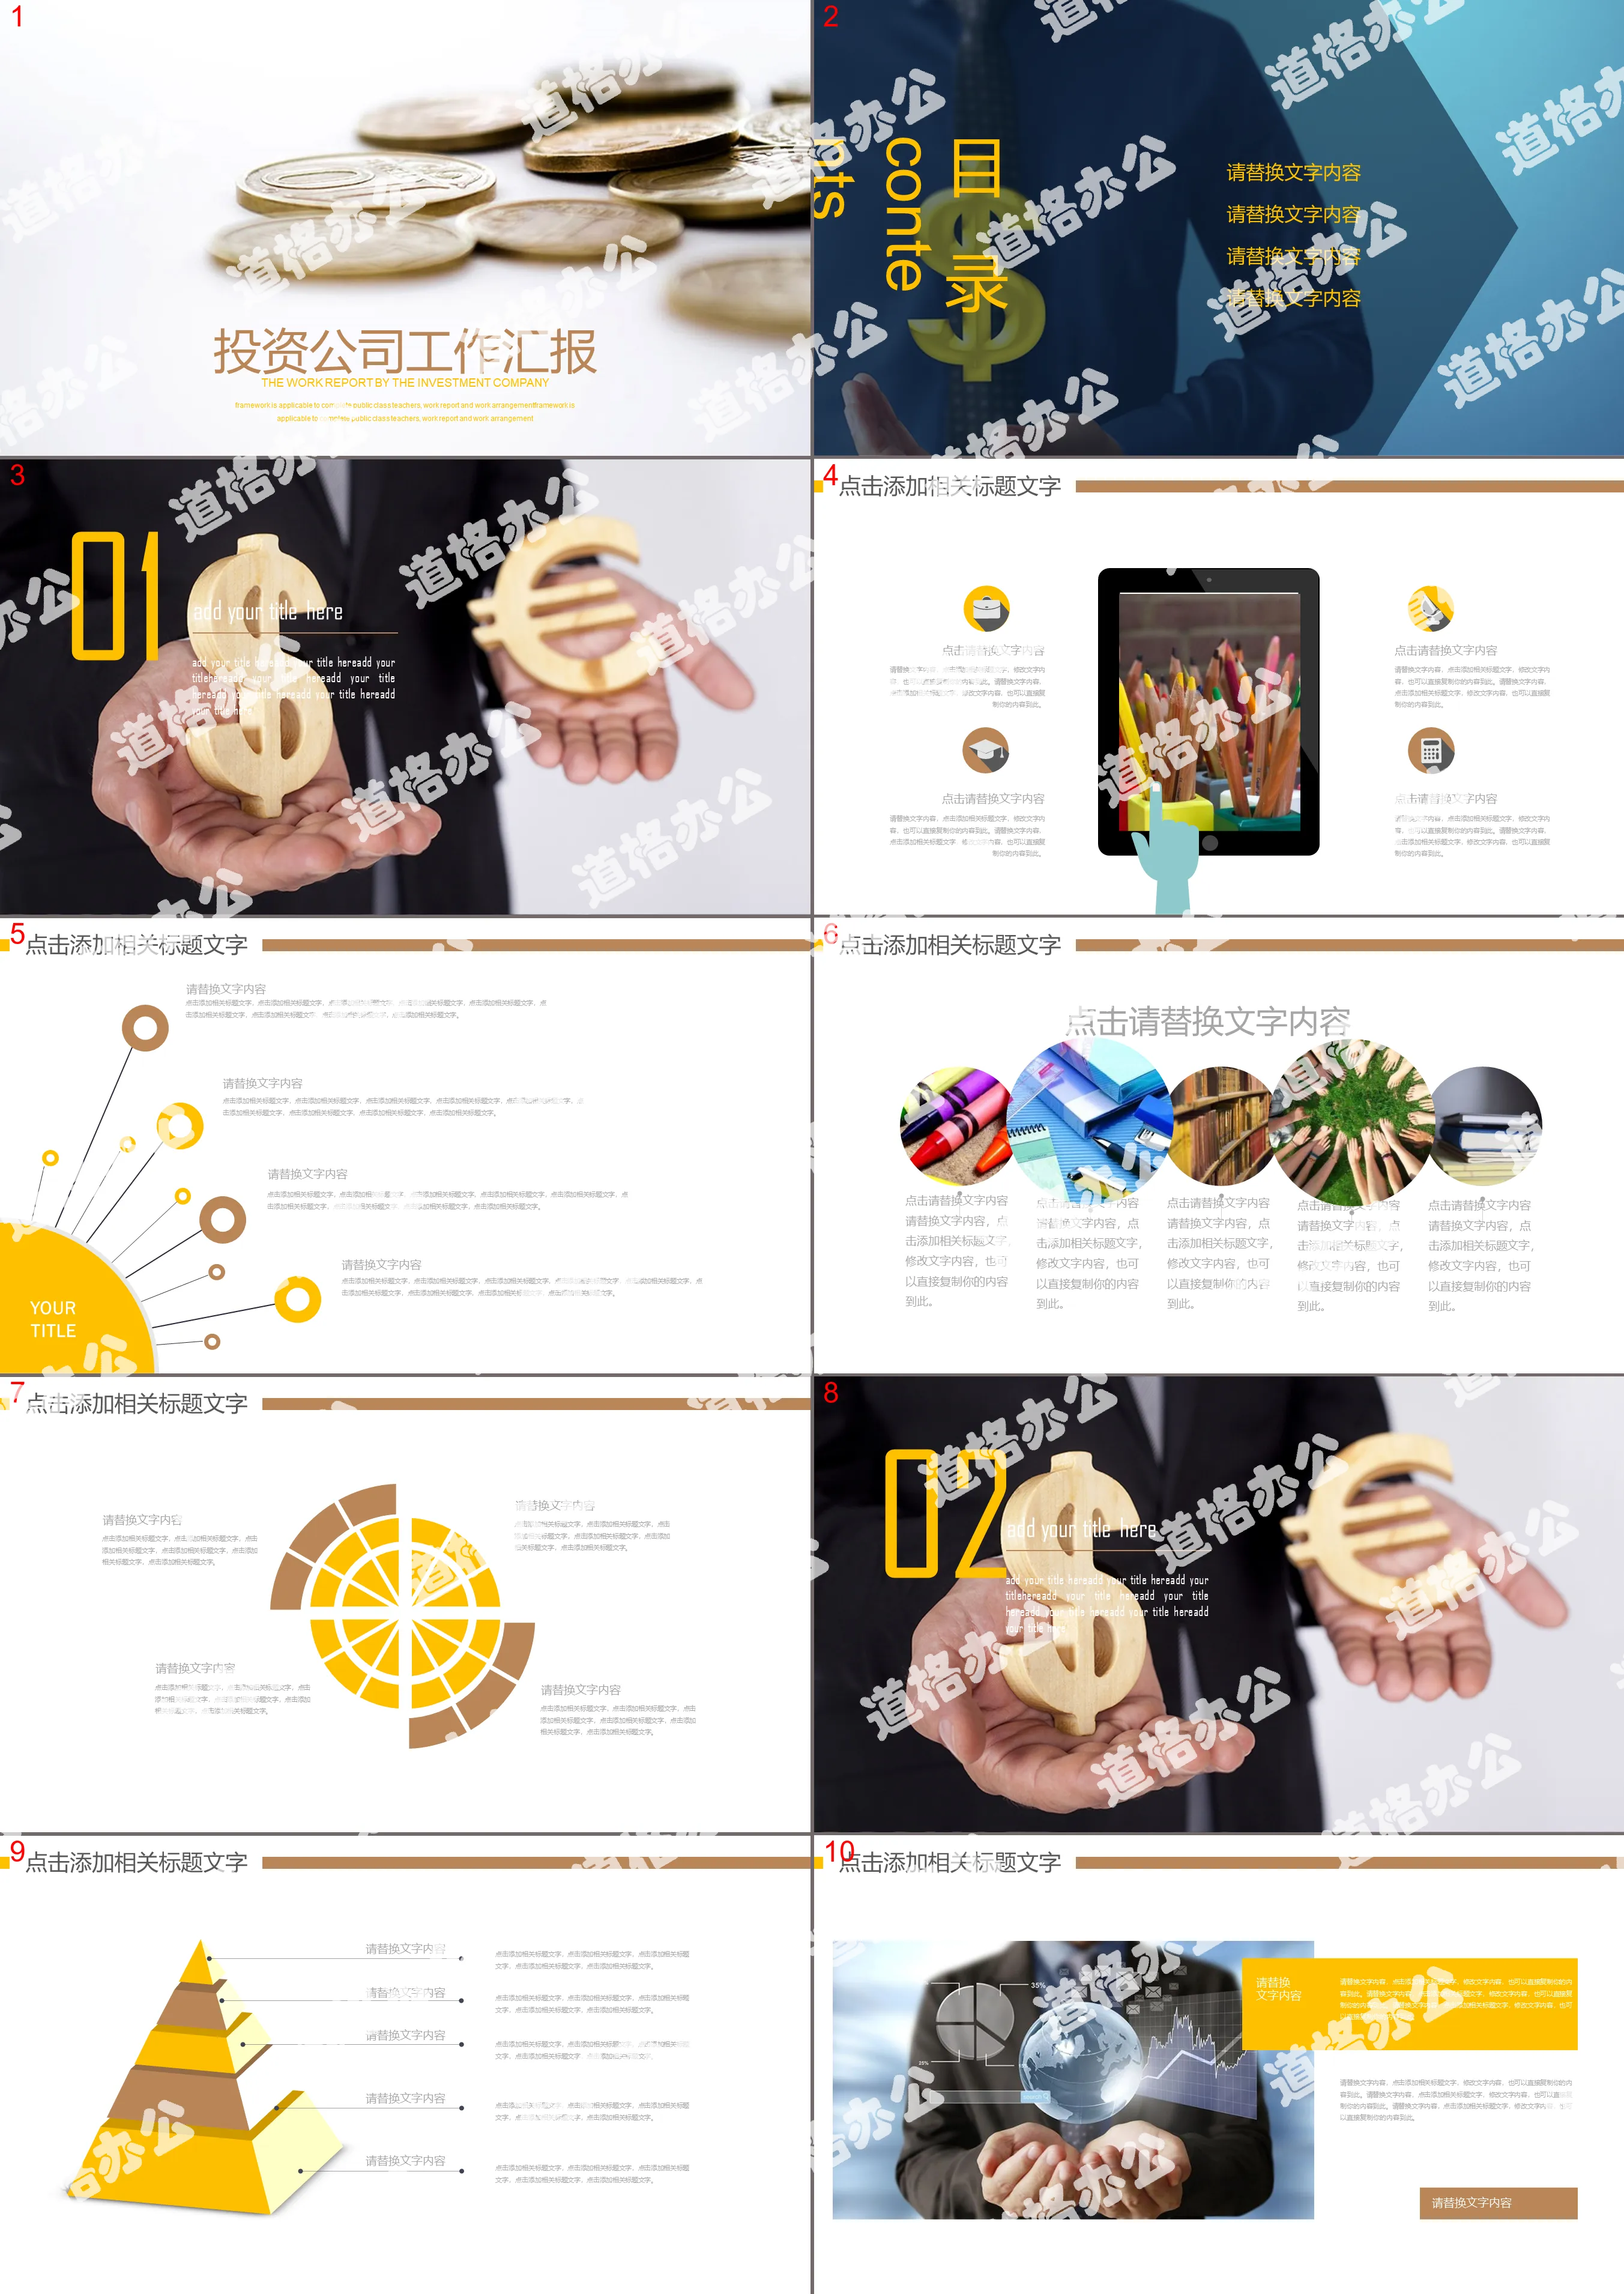 Financial investment PPT template with currency coin background